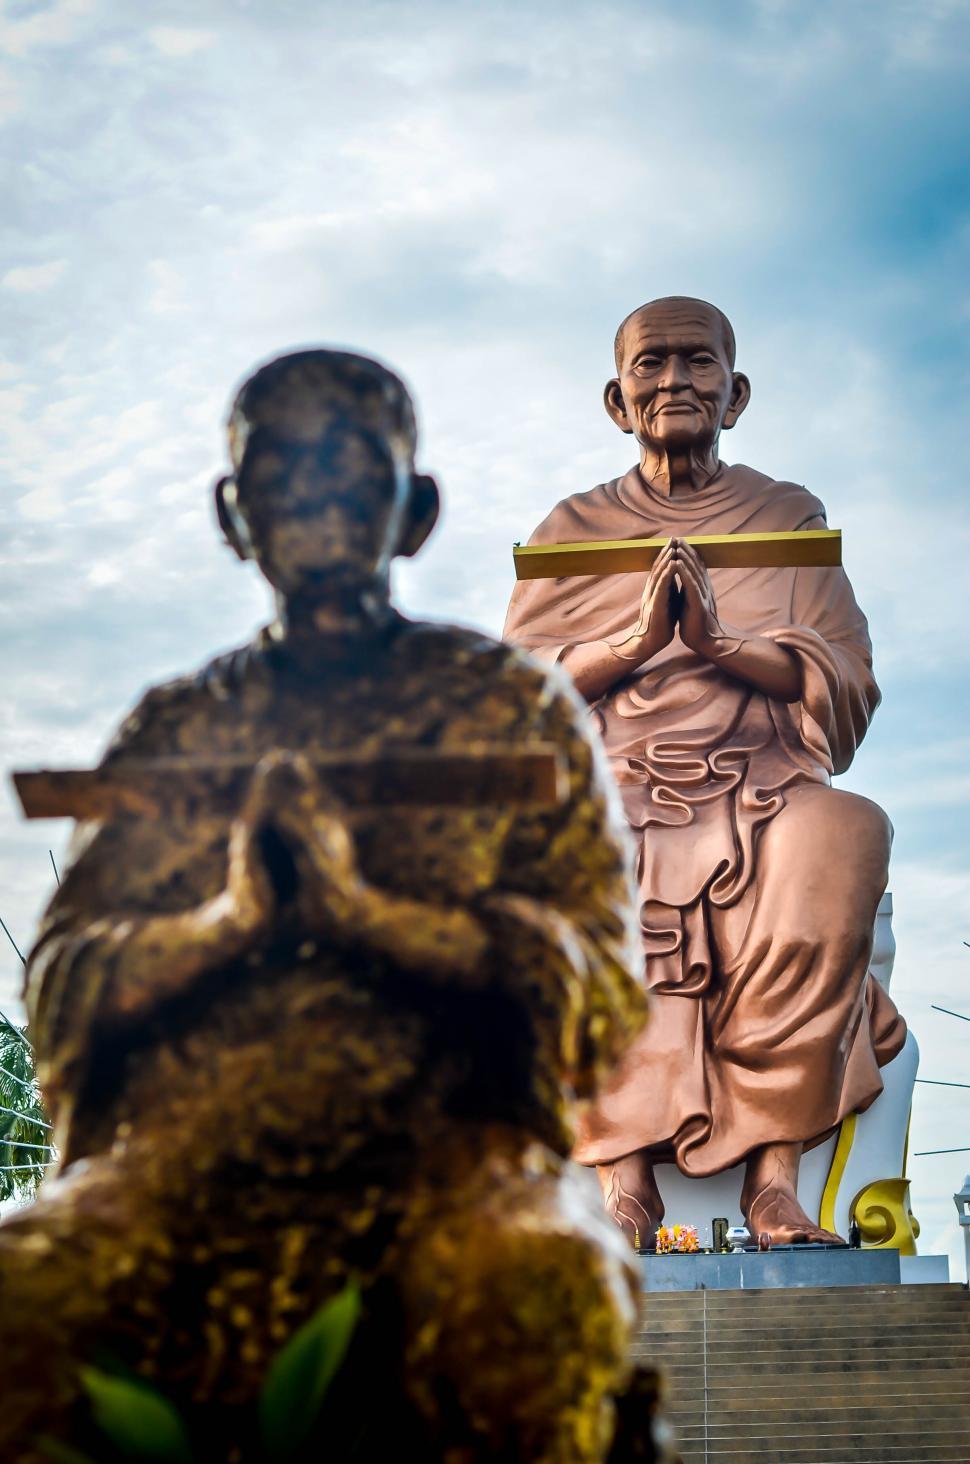 Free Image of Monk Statues in Thailand  